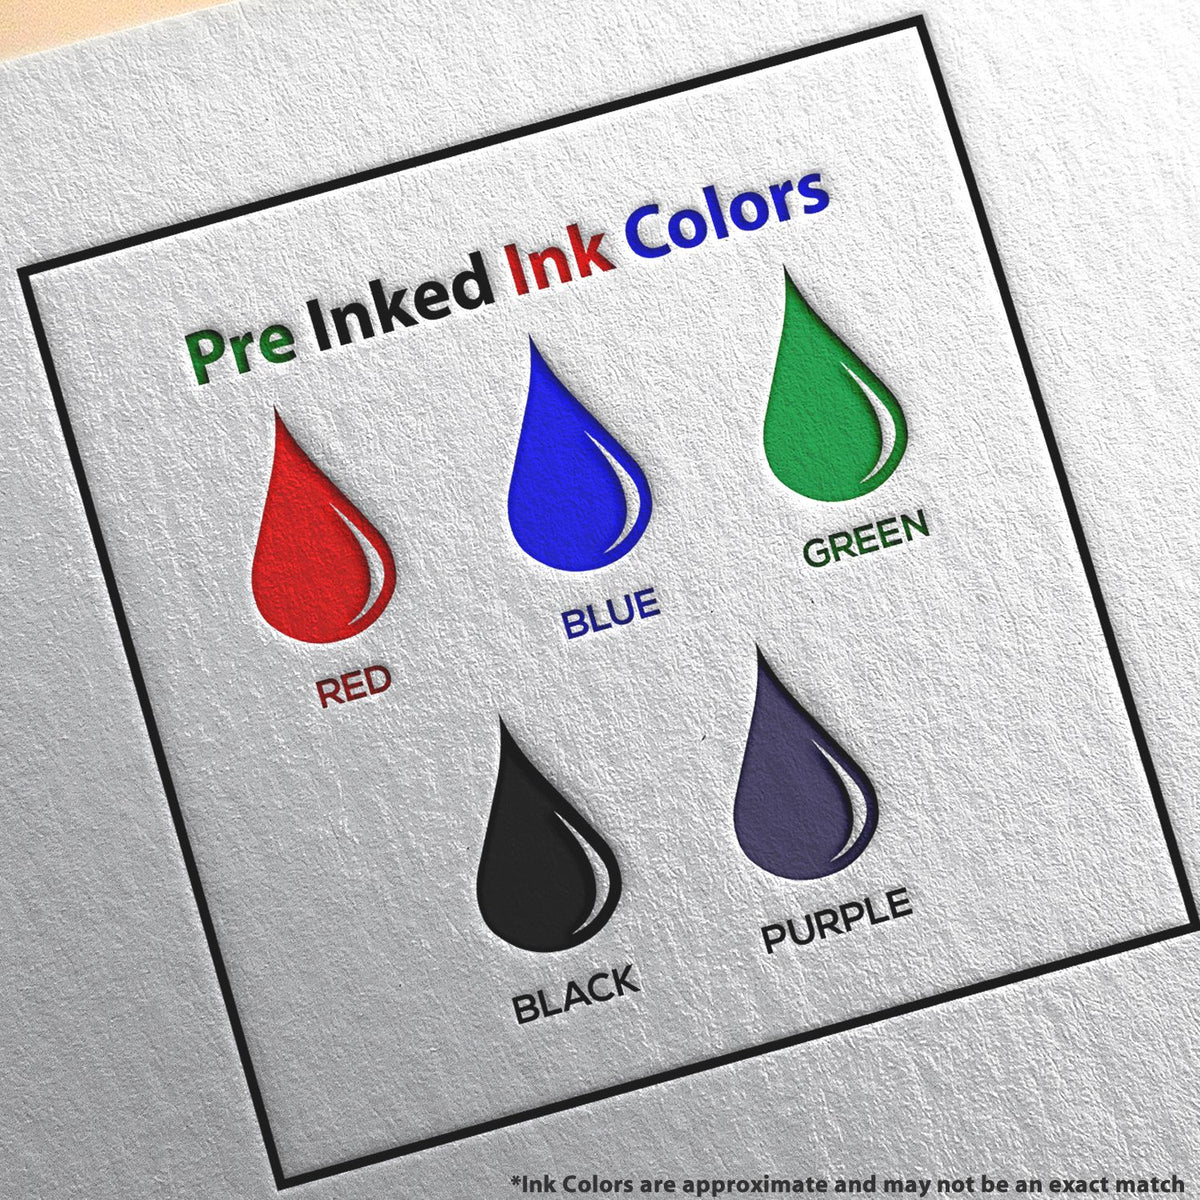 A picture showing the different ink colors or hues available for the MaxLight Premium Pre-Inked Virginia State Seal Notarial Stamp product.